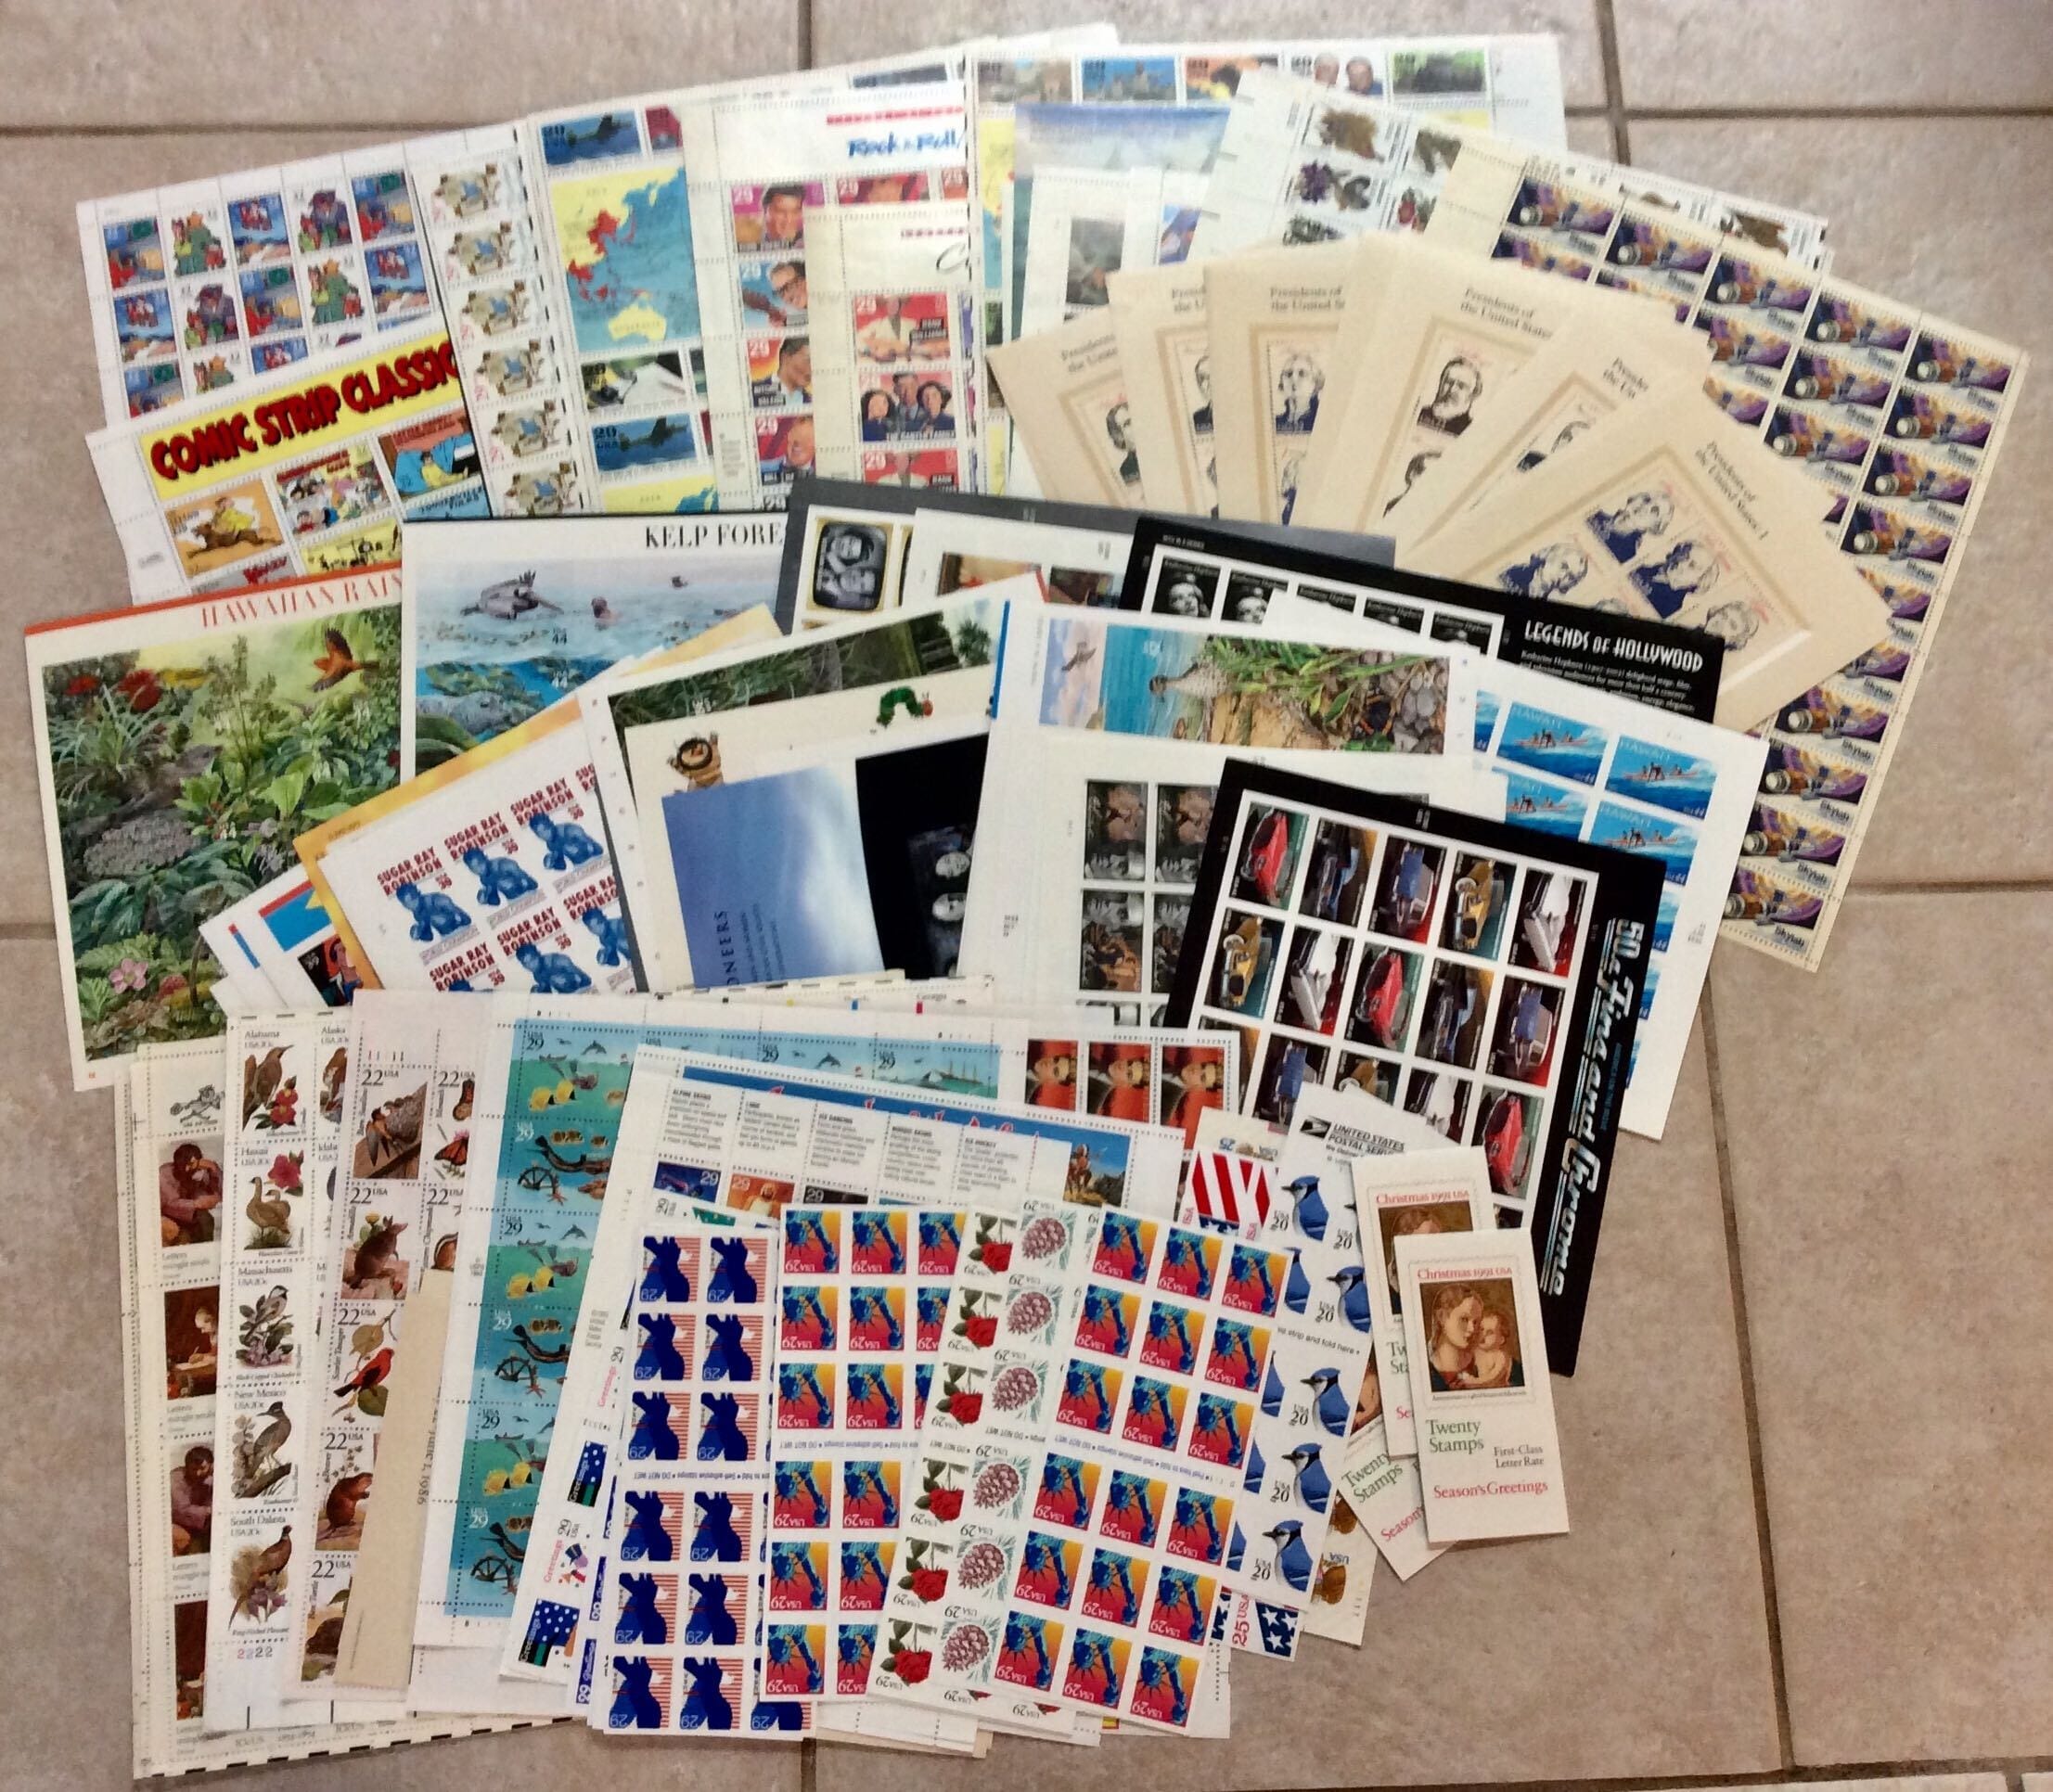 Under First-Class Stamps, Mixed Lot, New Condition ($1186.64 Face Value)